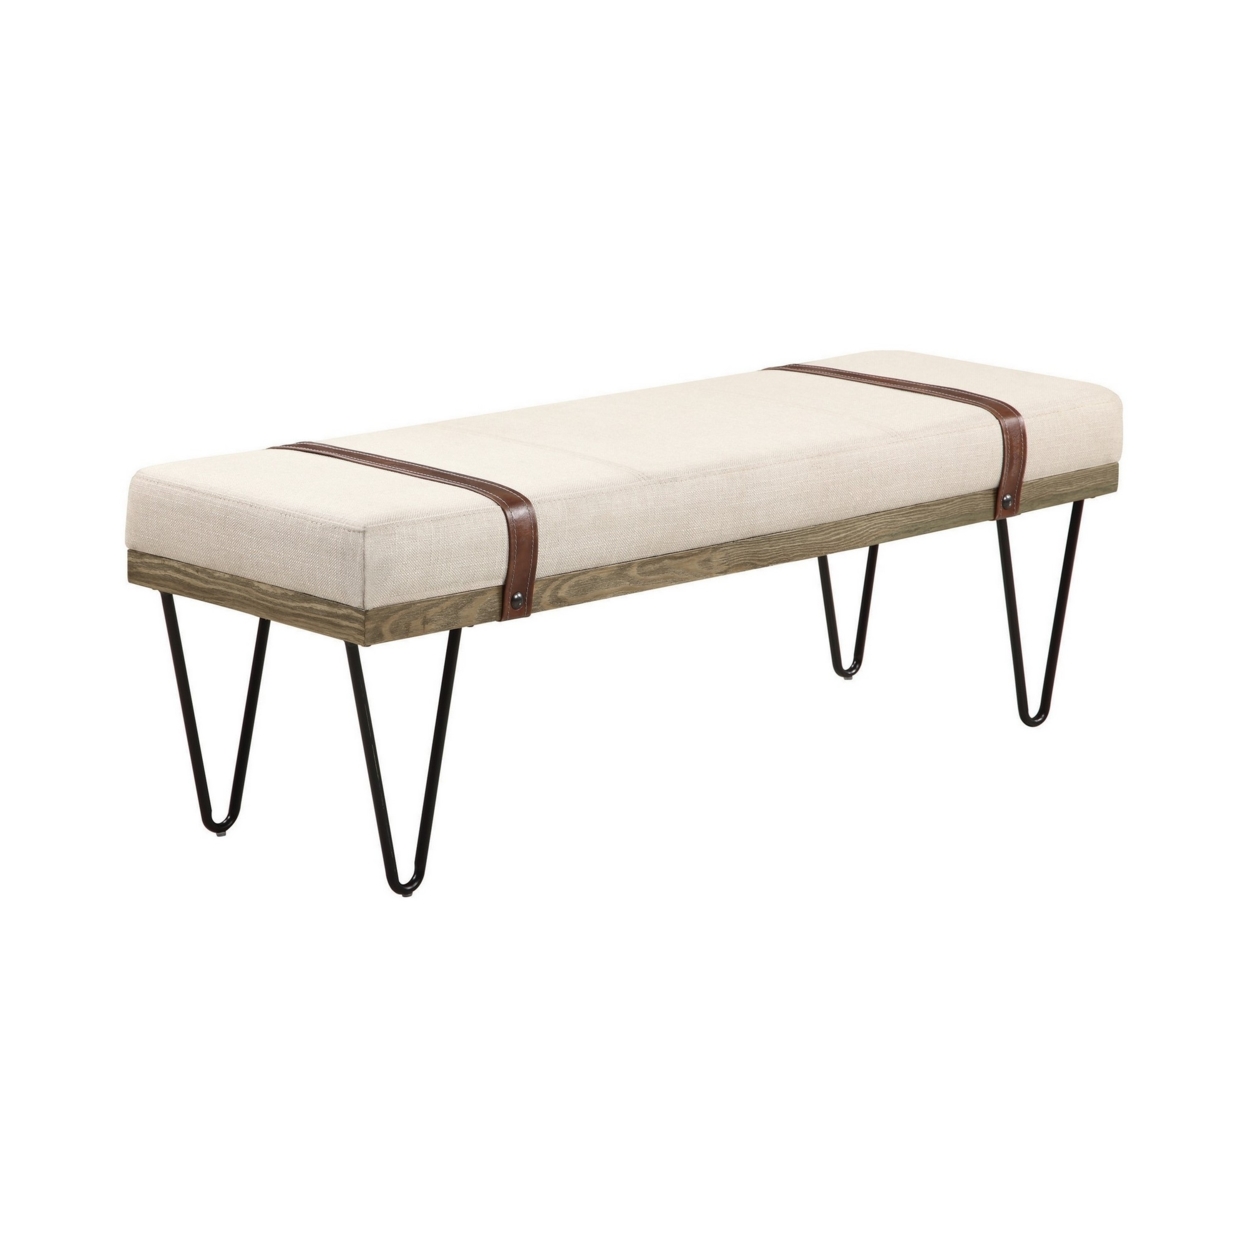 47 Inch Accent Bench, Faux Leather Straps, Black Hairpin Legs, Beige Fabric- Saltoro Sherpi